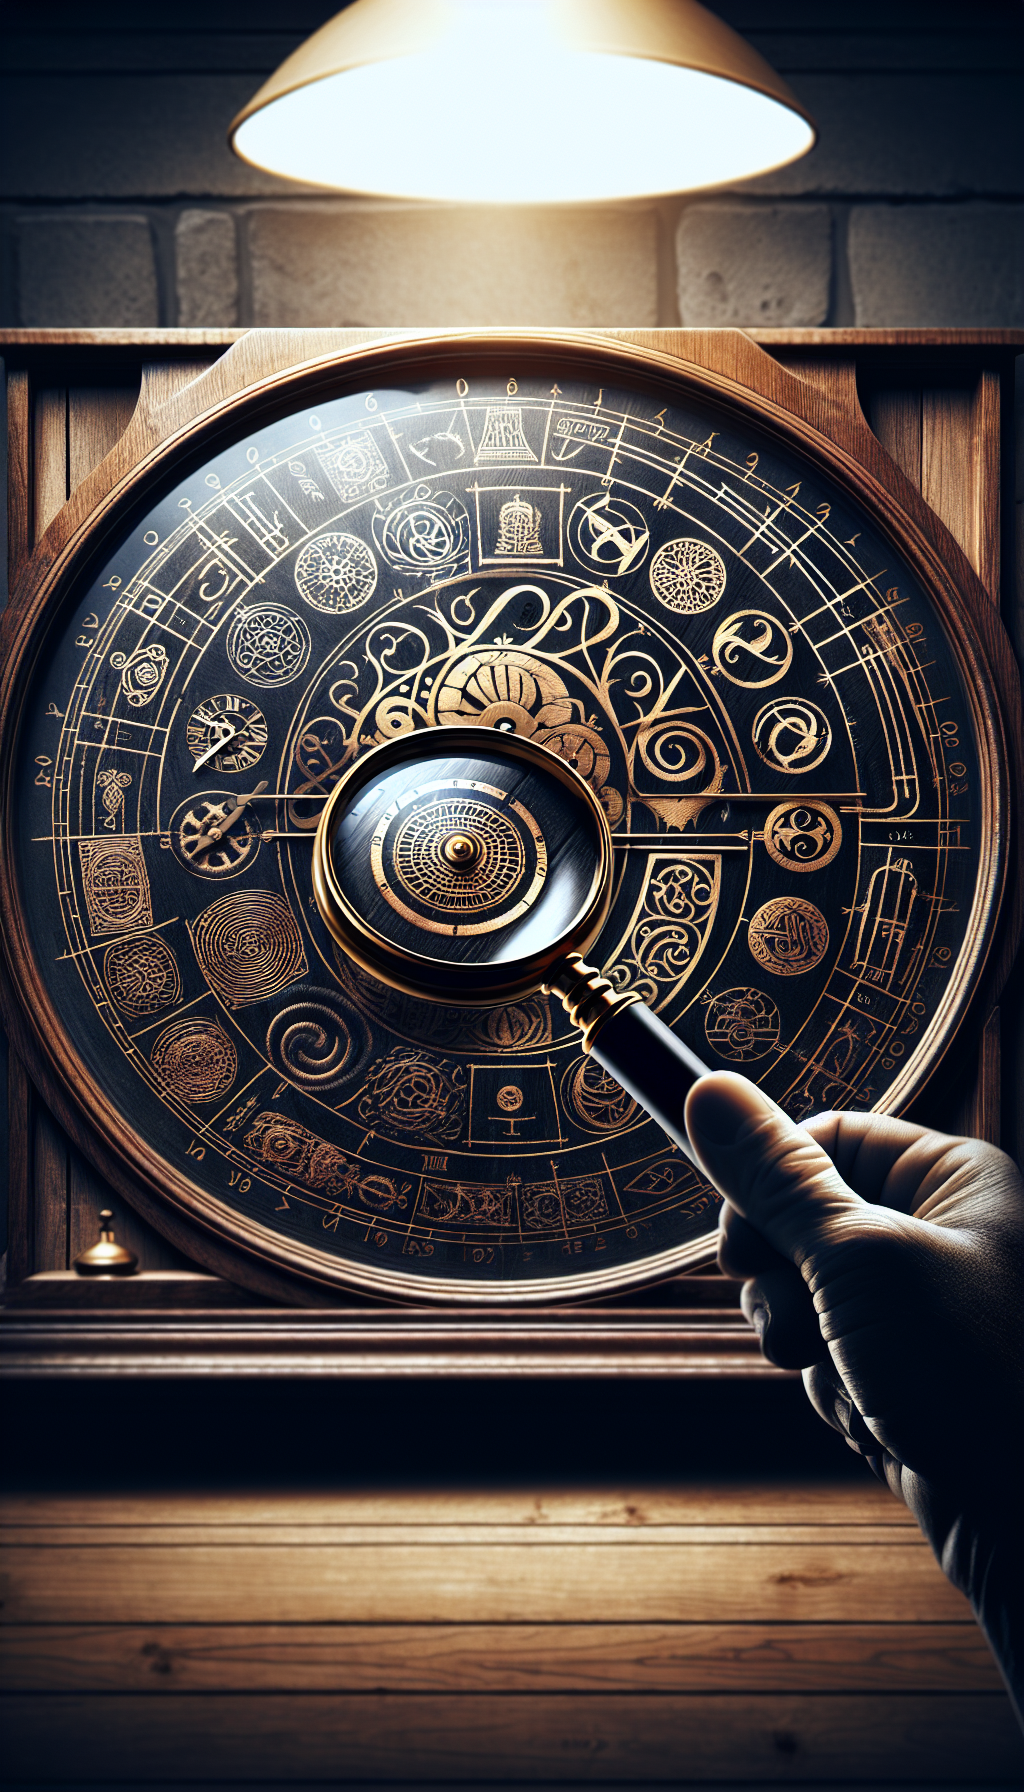 An illustration featuring an ancient German wall clock with its pendulum swinging, overlaid with a magnifying glass that reveals intricate hallmark engravings on the clock's face. Each engraved signature is stylized to represent different eras of German clockmaking, with Gothic, Renaissance, and Baroque elements, symbolizing the evolution and identification process of these historical timepieces.